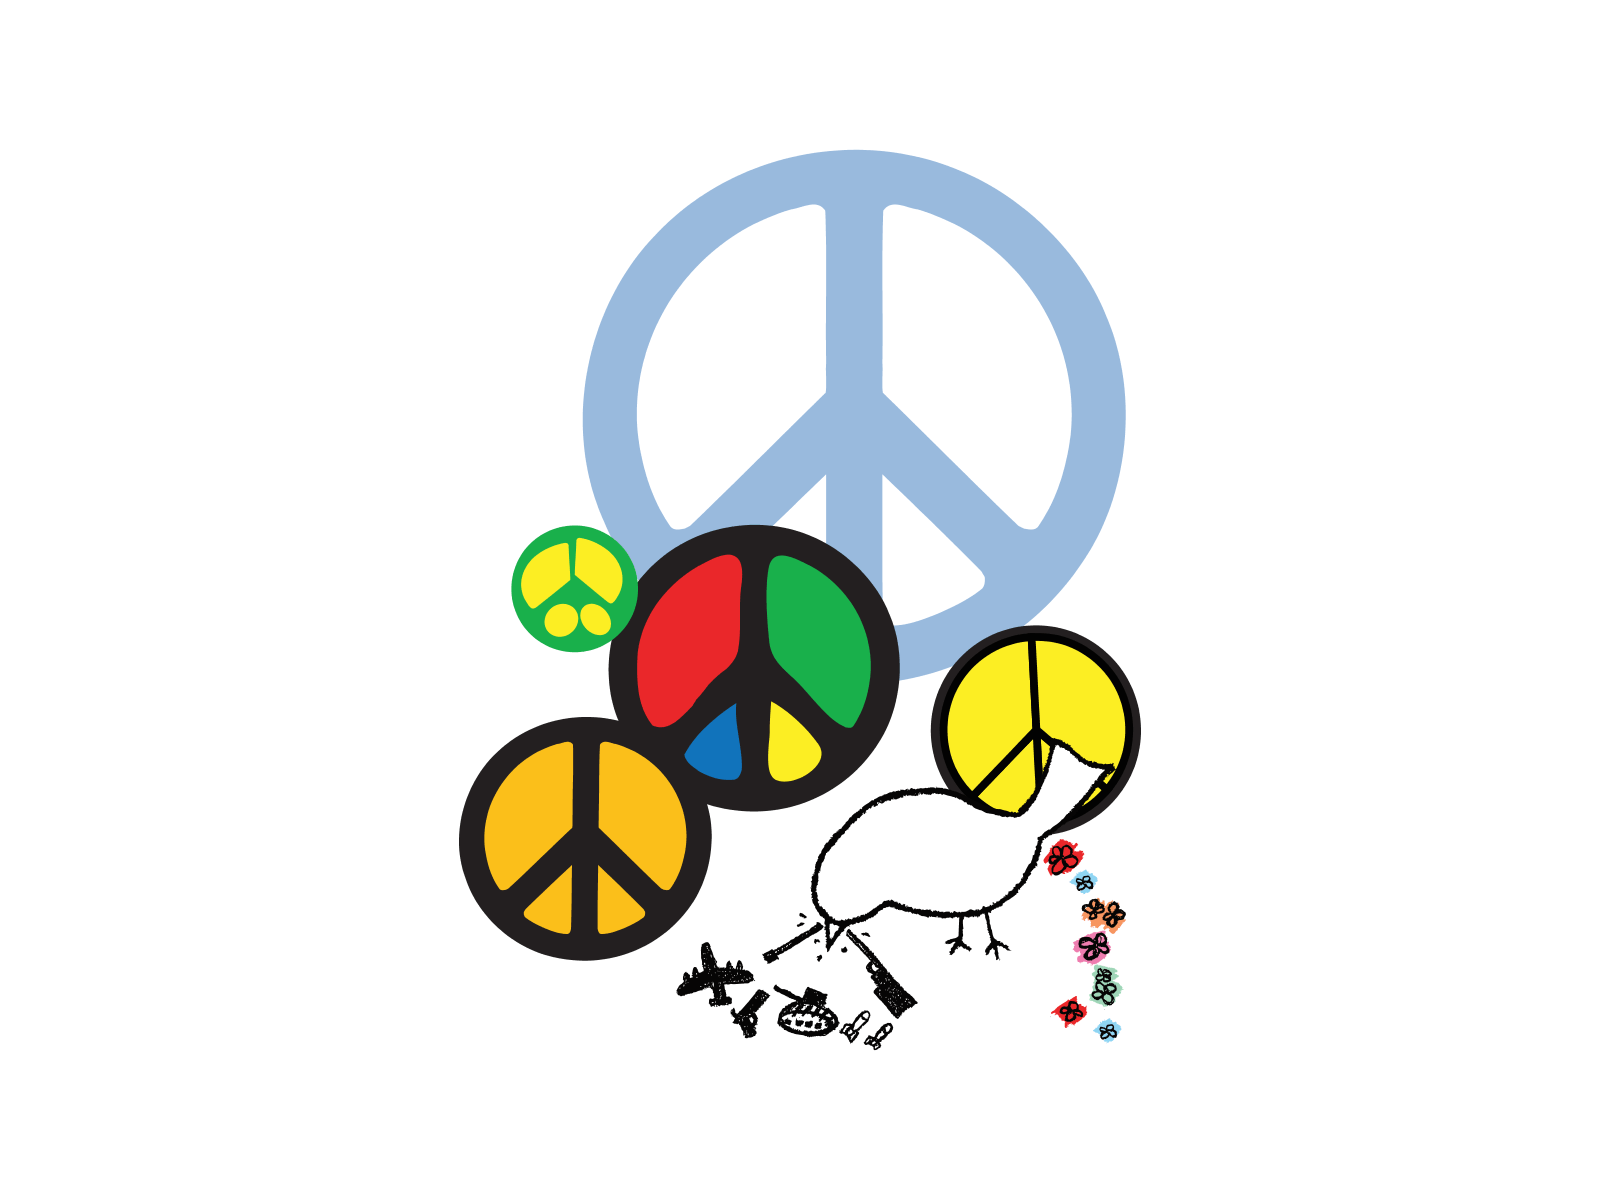 Peace Sign HD Photos Wallpapers : 1600x1200 HD ~ Wall DC